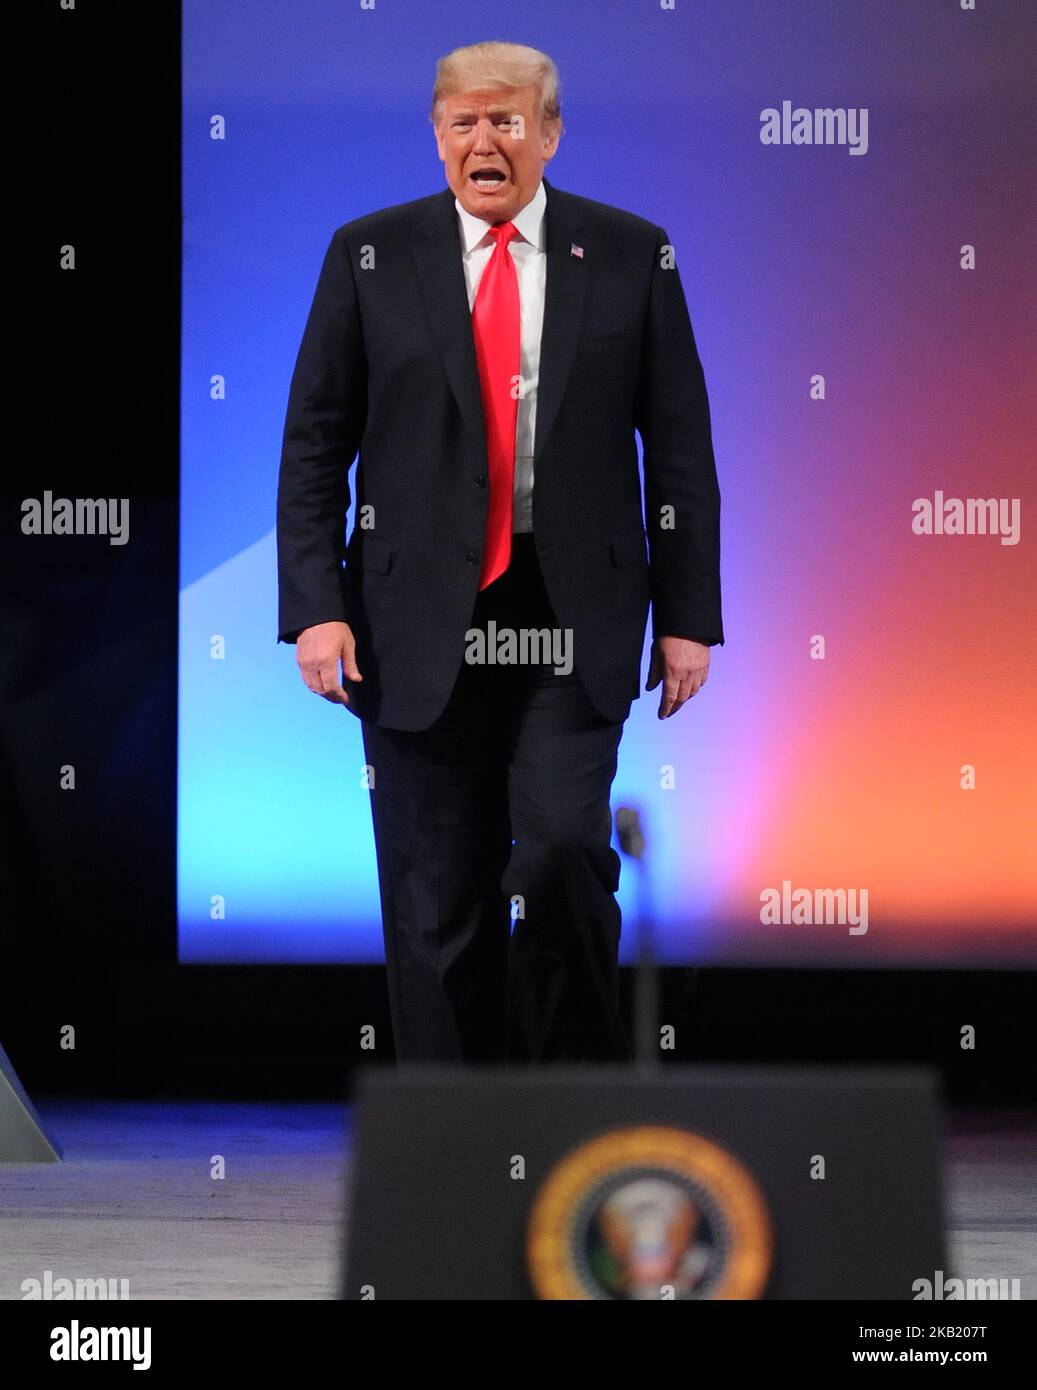 October 8, 2018 - Orlando, Florida, United States - U.S. President Donald Trump arrives on stage to address attendees at the International Association of Chiefs of Police Annual Convention on October 8, 2018 at the Orange County Convention Center in Orlando, Florida. (Photo by Paul Hennessy/NurPhoto) Stock Photo